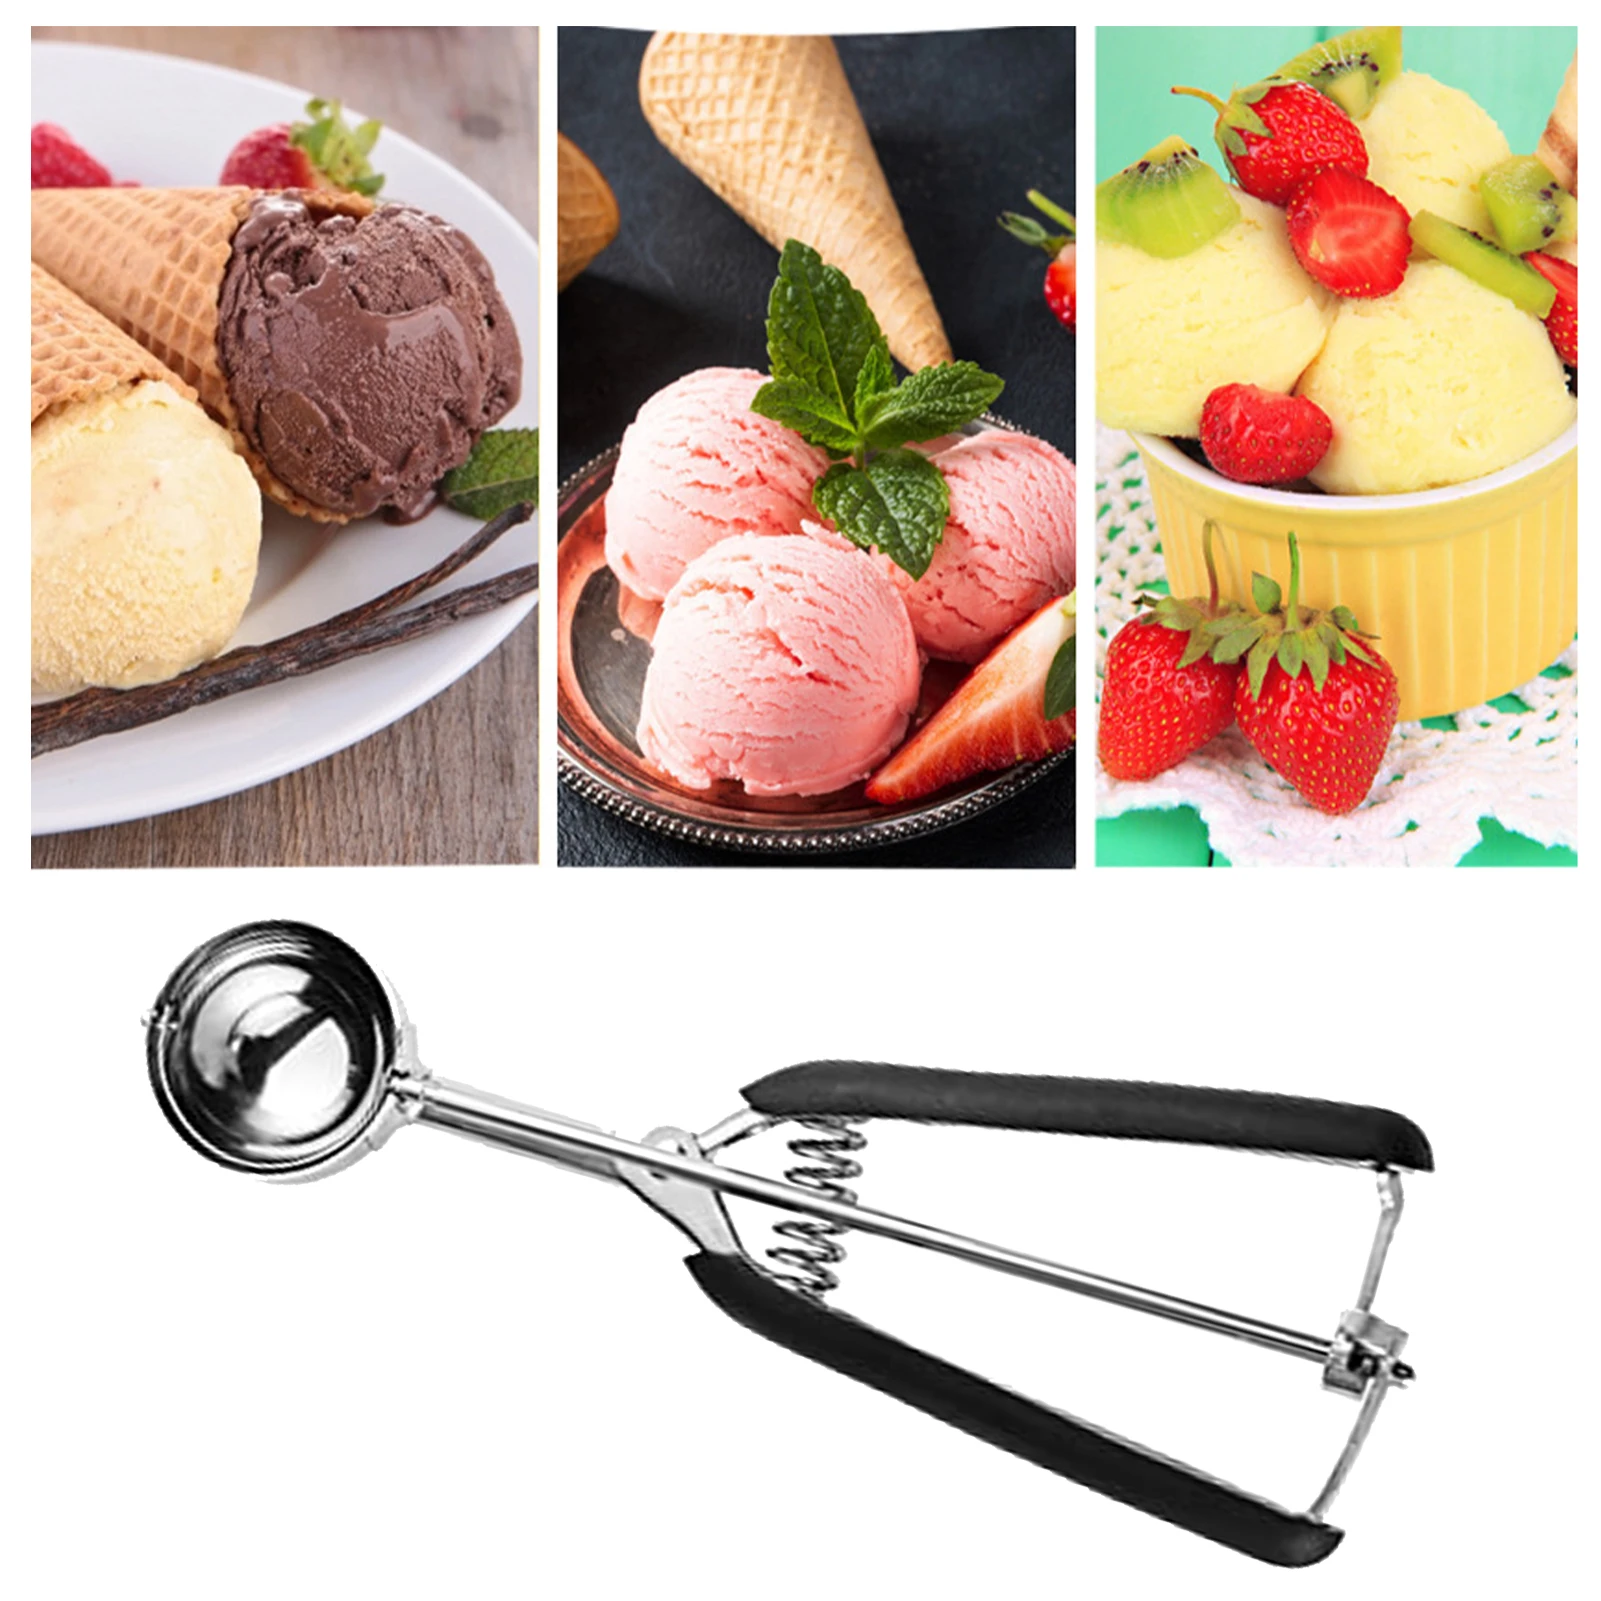 Small Cookie Scoop 2 tsp. Professional Stainless Steel Ice Cream Scoop 30  mm. Melon Baller Scoop Good Soft Grips. Quick Trigger Release 